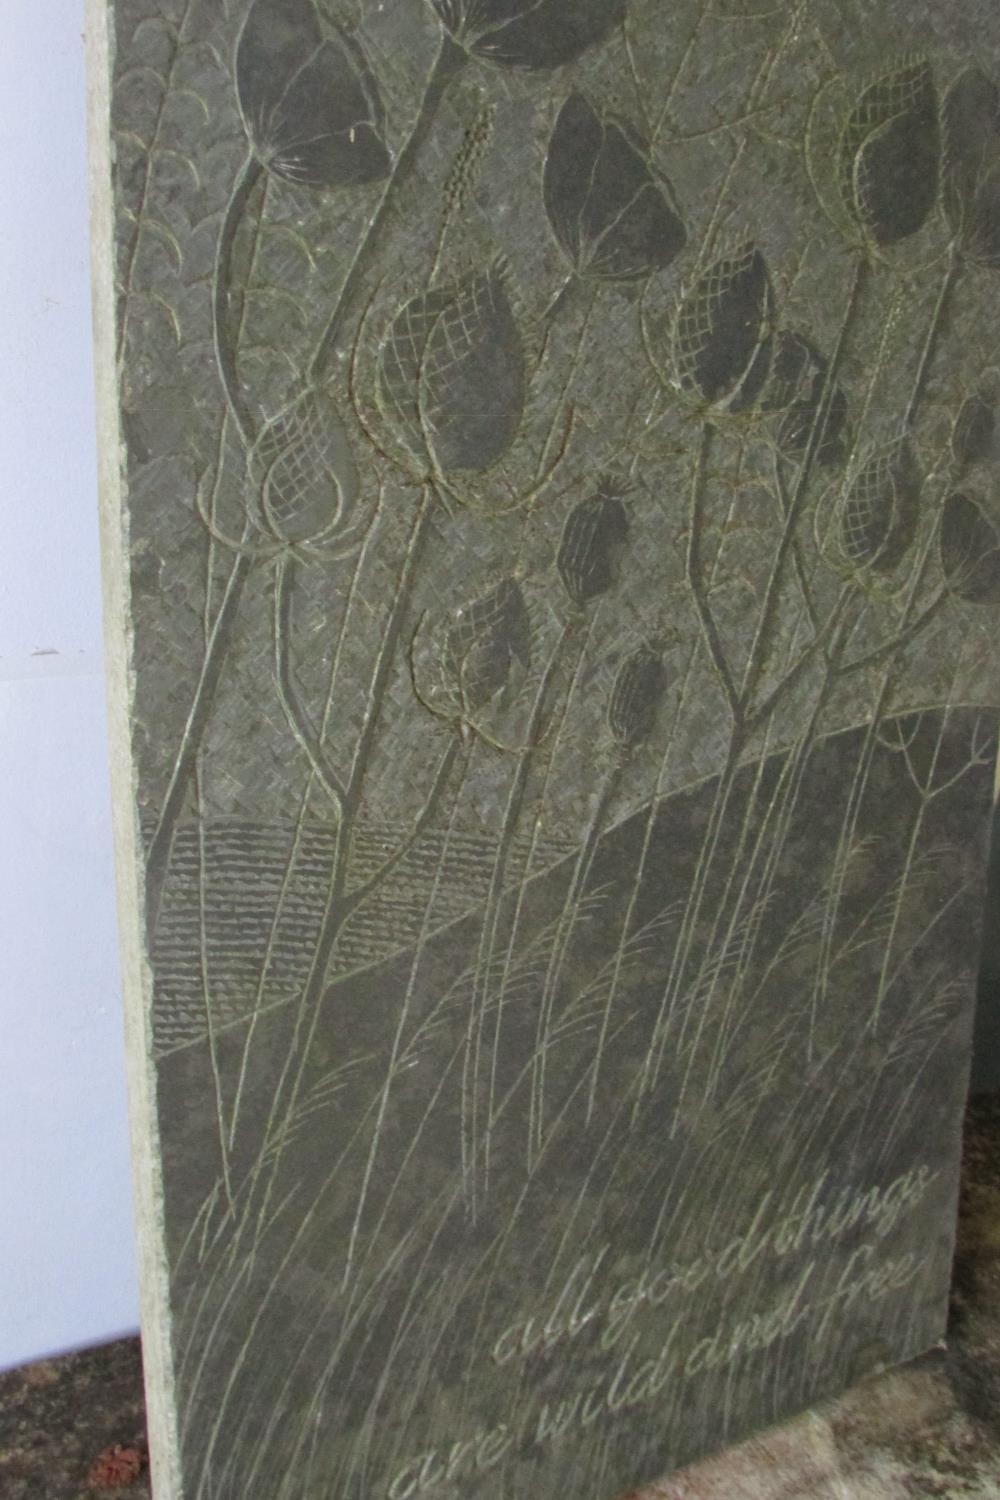 A carved slate panel with carved thistles and poppies design in a contoured landscape - 'All good - Image 3 of 3